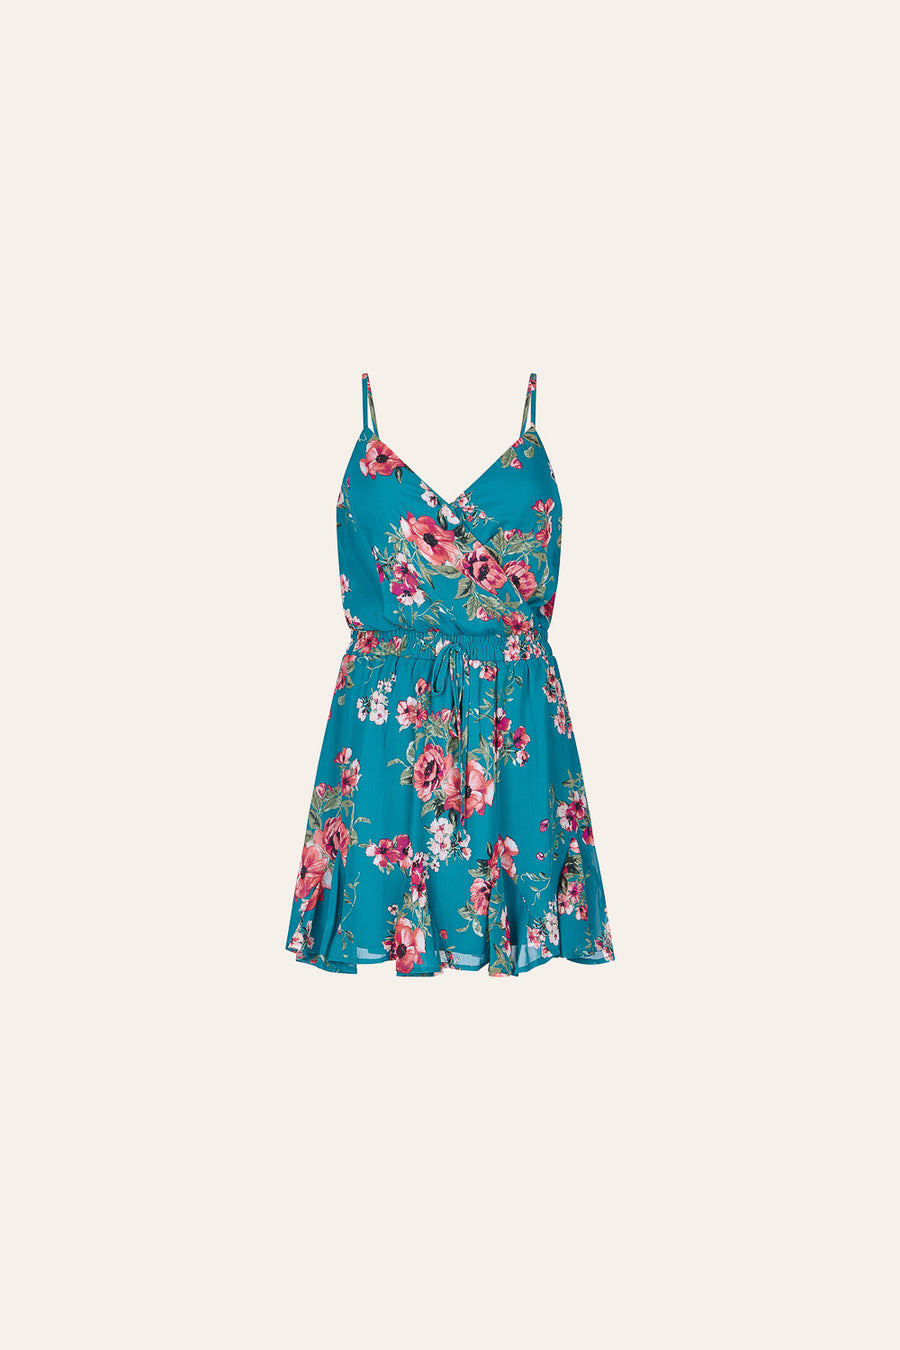 Teal Floral Strappy Dress - Trixxi Clothing